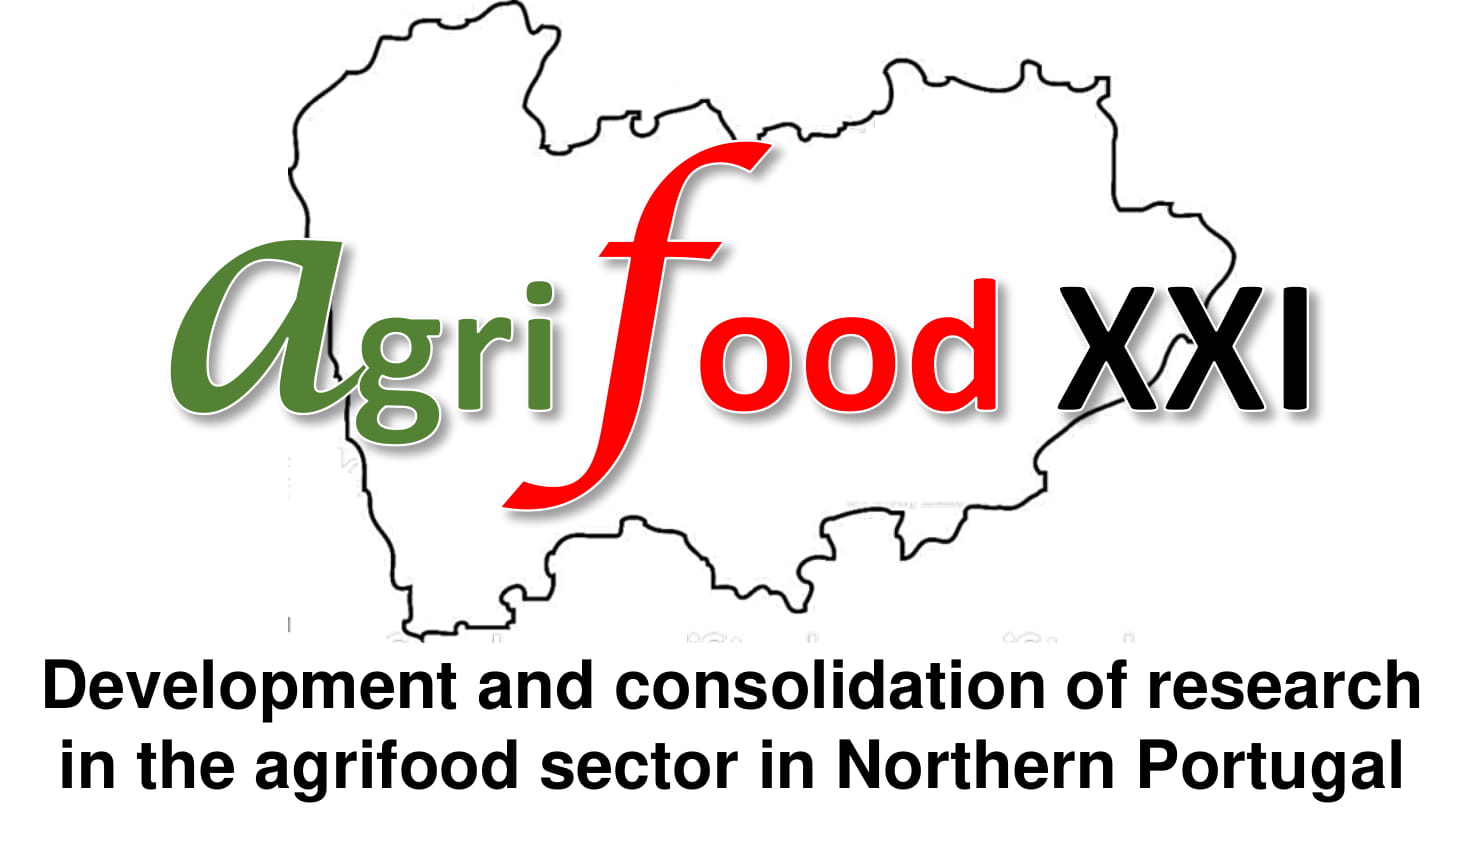 AGRIFOOD XXI – Development and consolidation of research in the agrifood sector in Northern Portugal